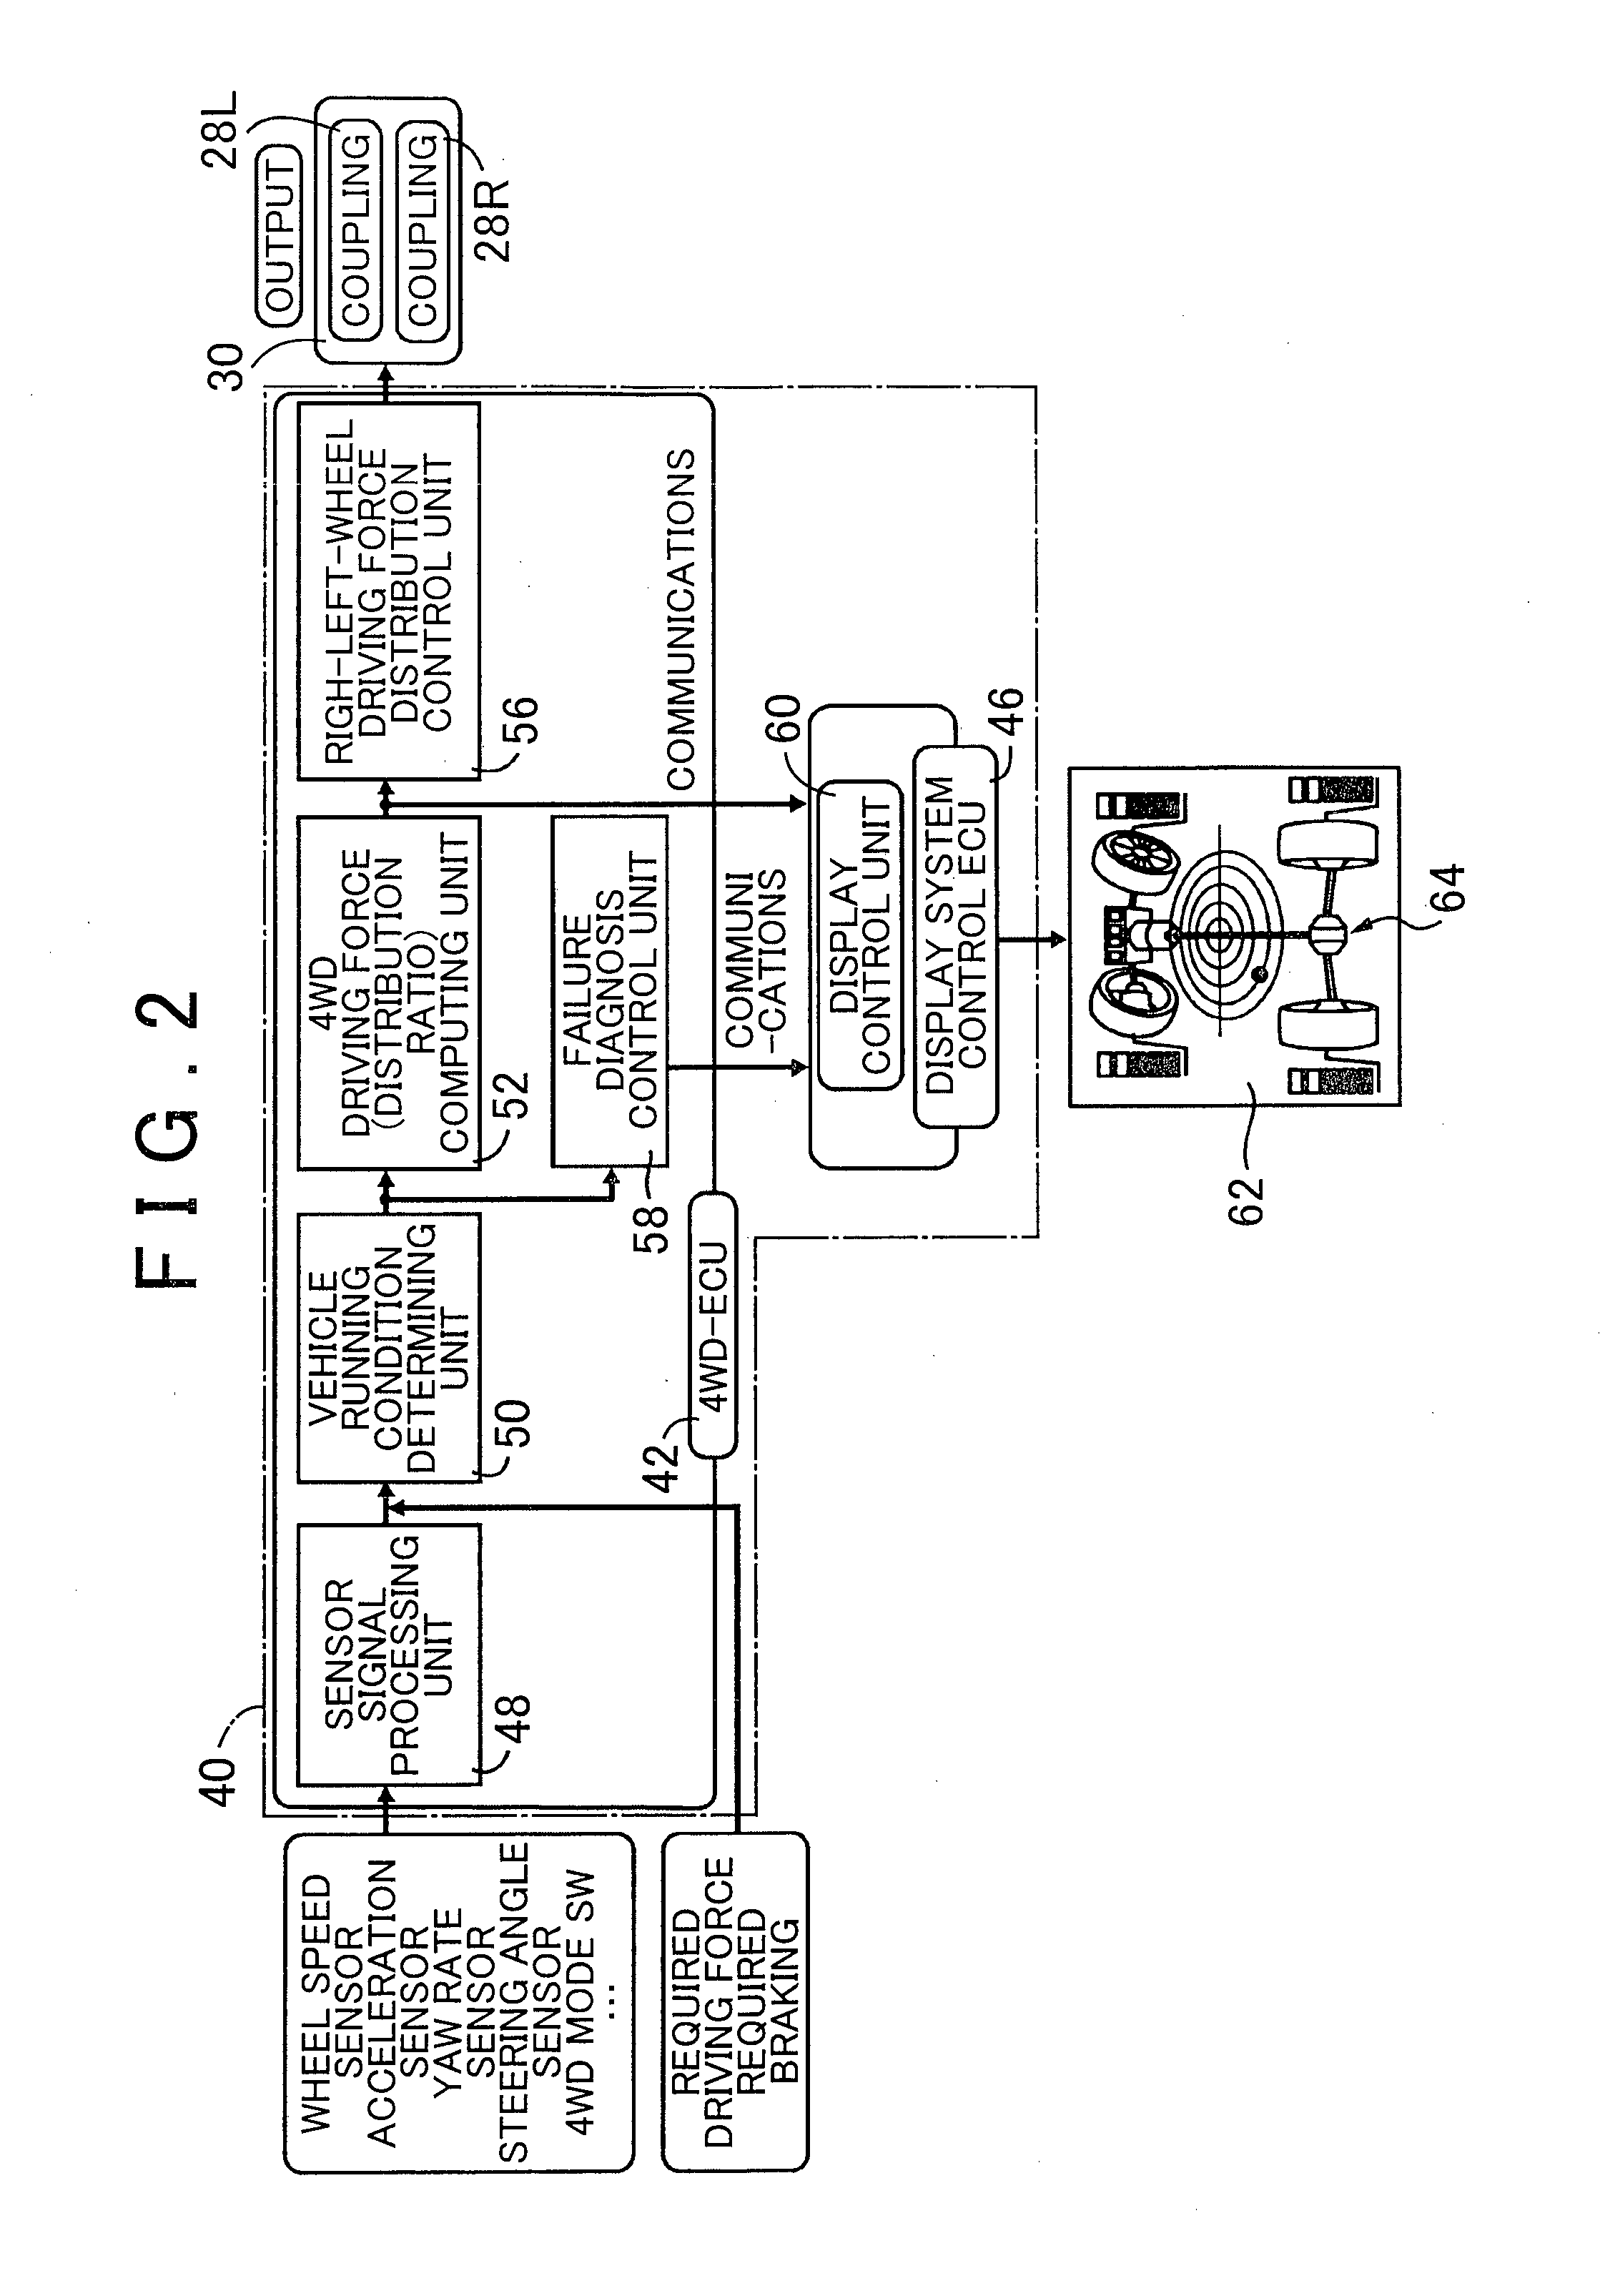 Display control system for vehicle